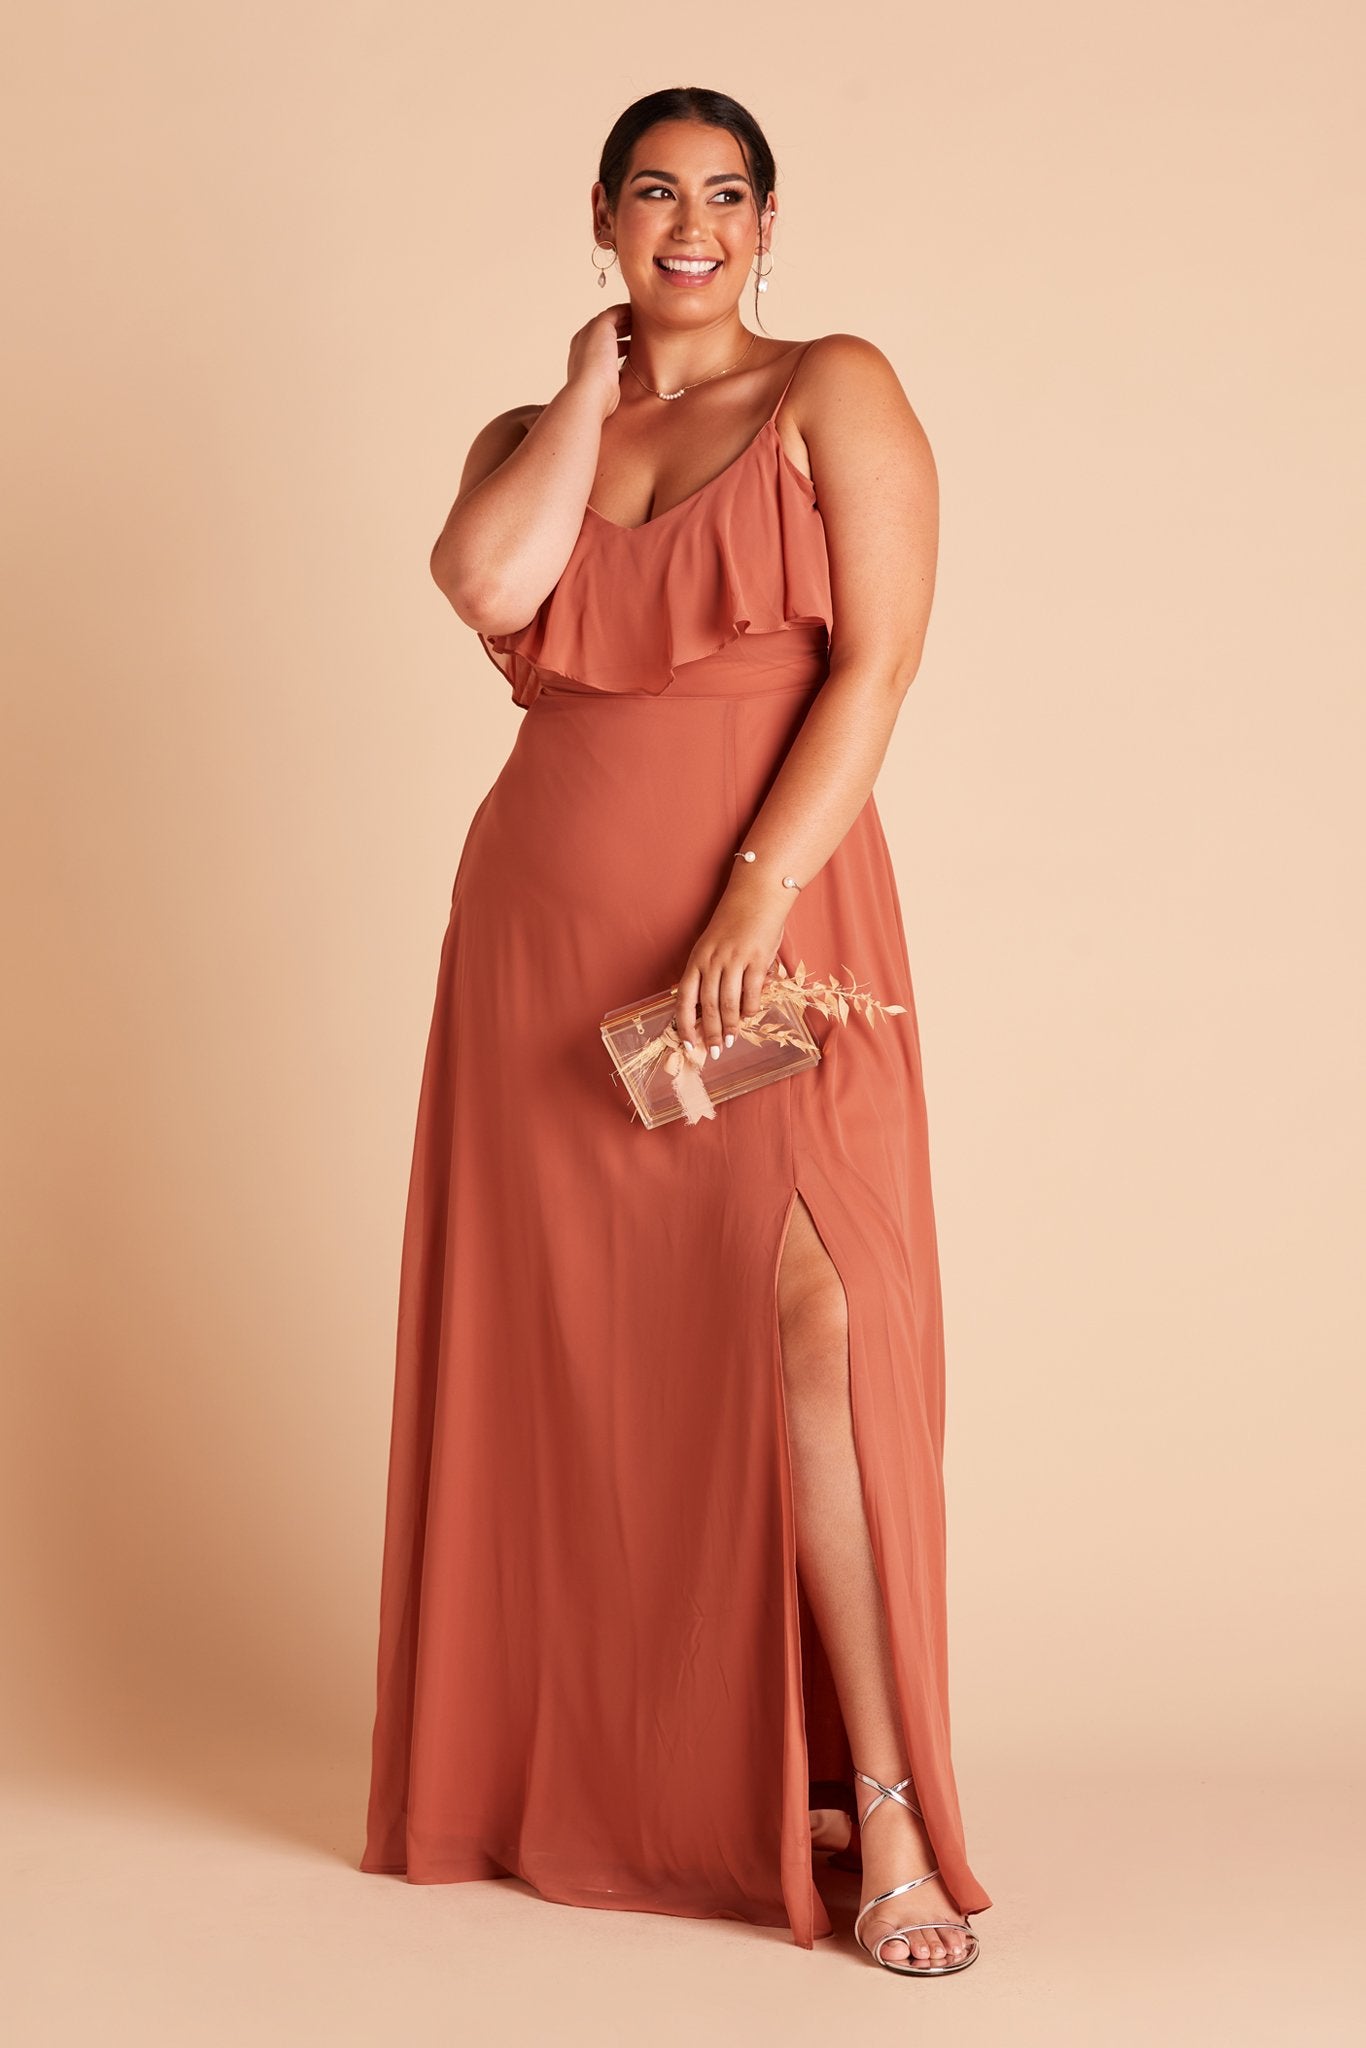 Jane convertible plus size bridesmaid dress with slit in terracotta orange chiffon by Birdy Grey, front view